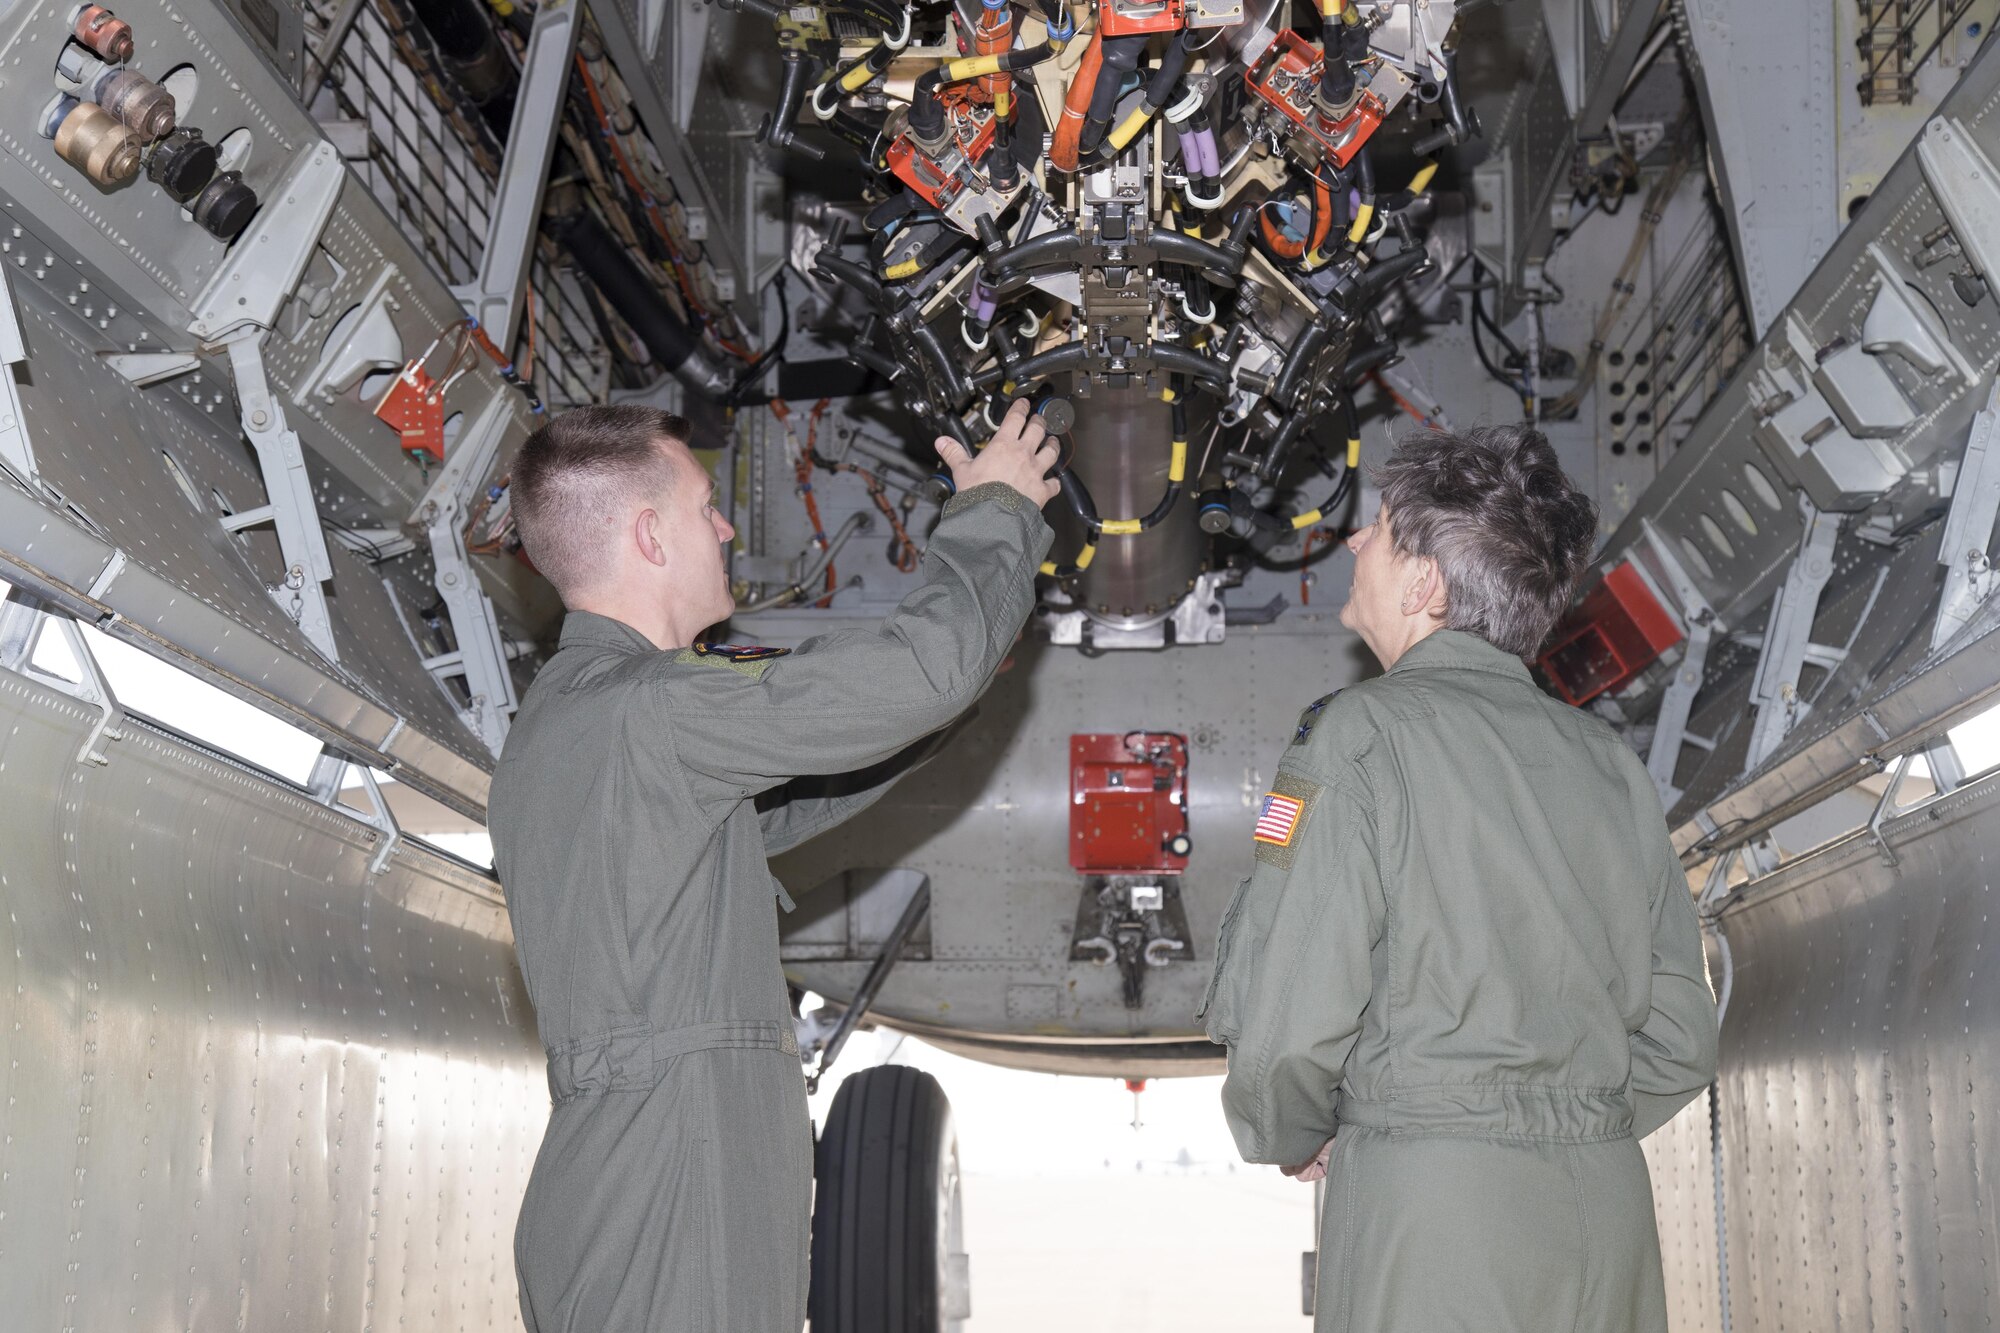 Maj. Timothy Lau, 419th Flight Test Squadron, shows Gen. Ellen Pawlikowski, commander of Air Force Materiel Command, the bomb bay of a B-52 Stratofortress May 12. (U.S. Air Force photo by Christian Turner)